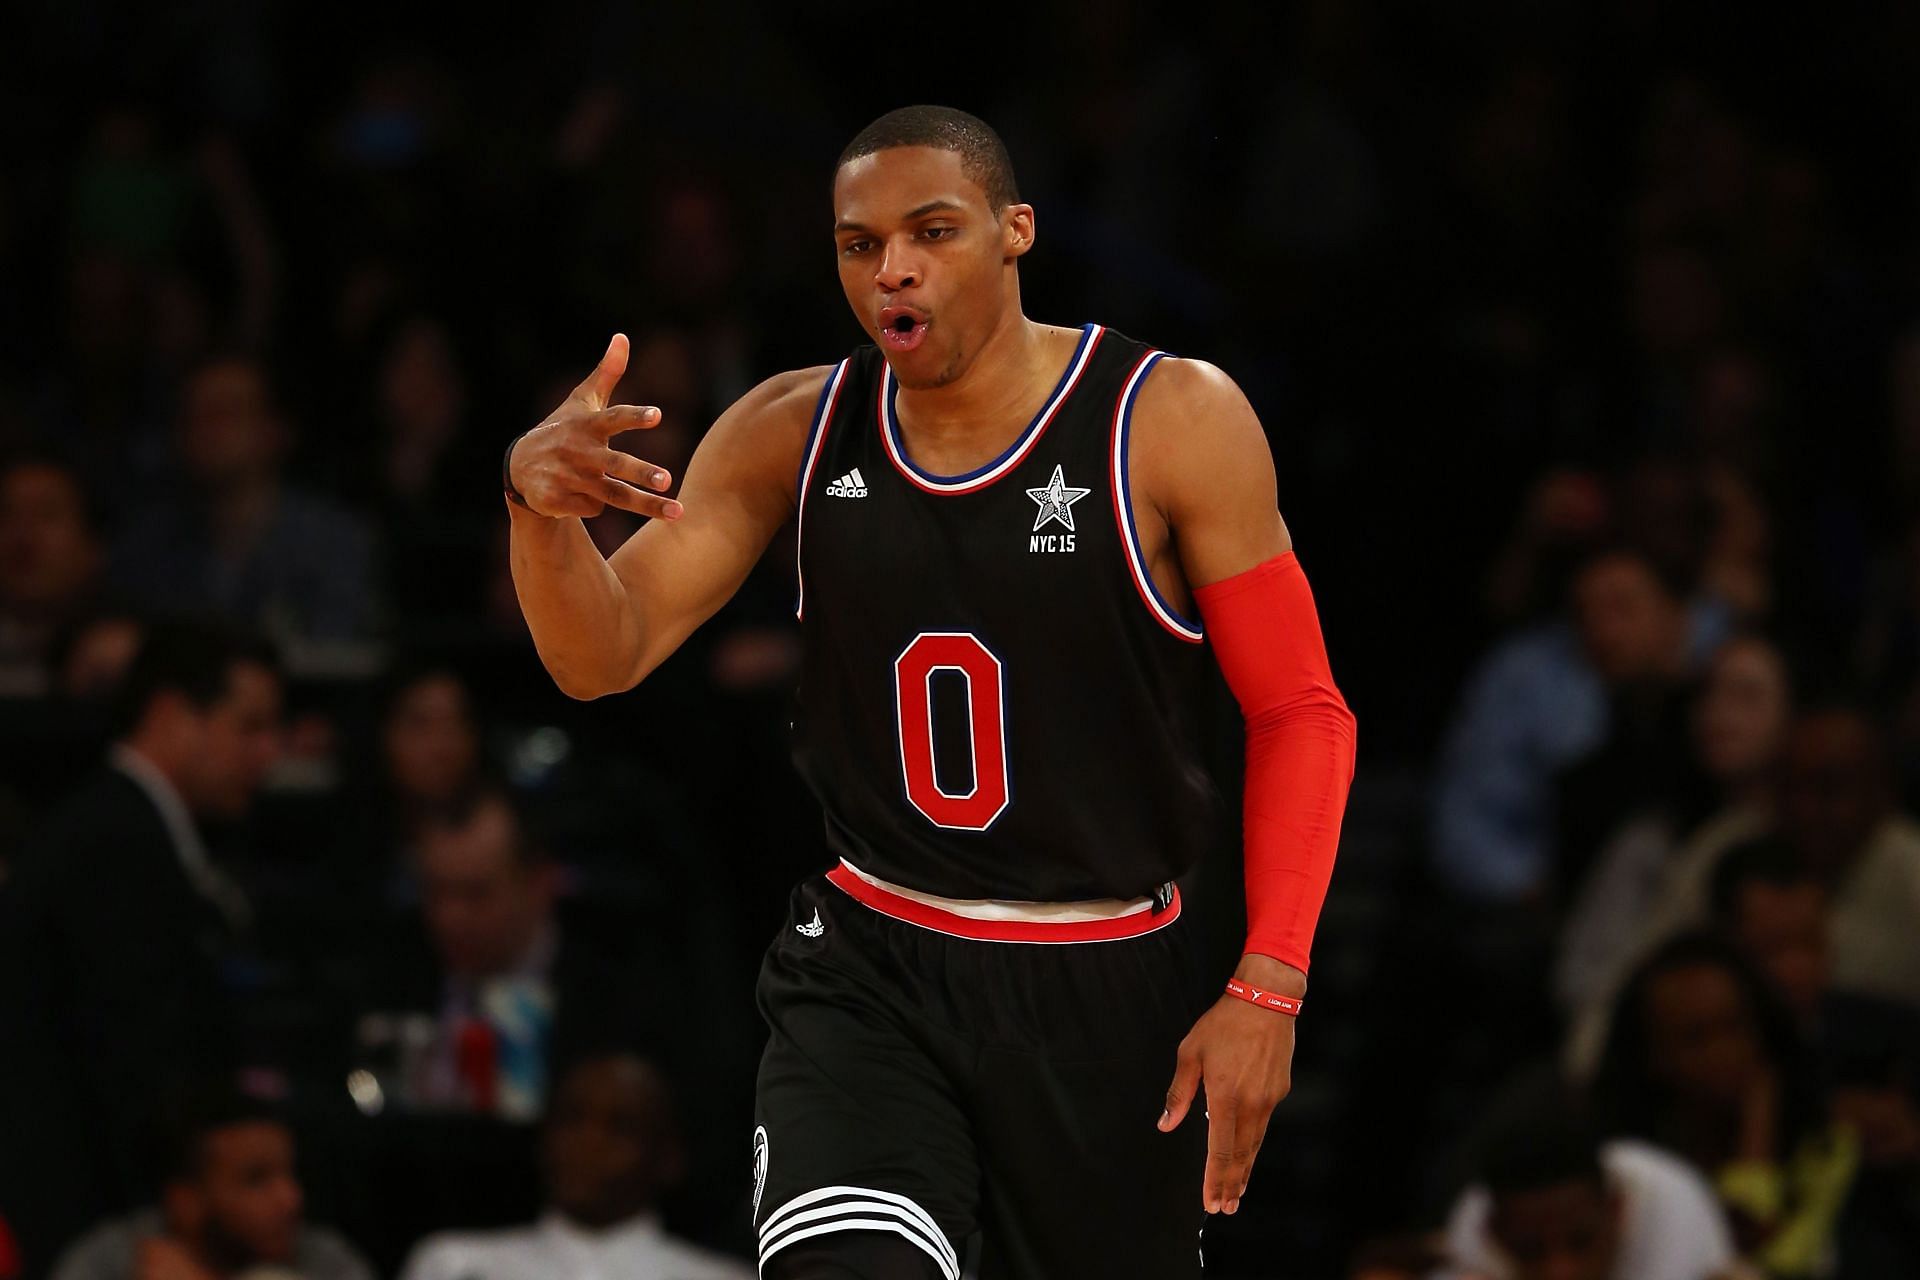 2015 NBA All-Star Game -- Russell Westbrook scores 41 points